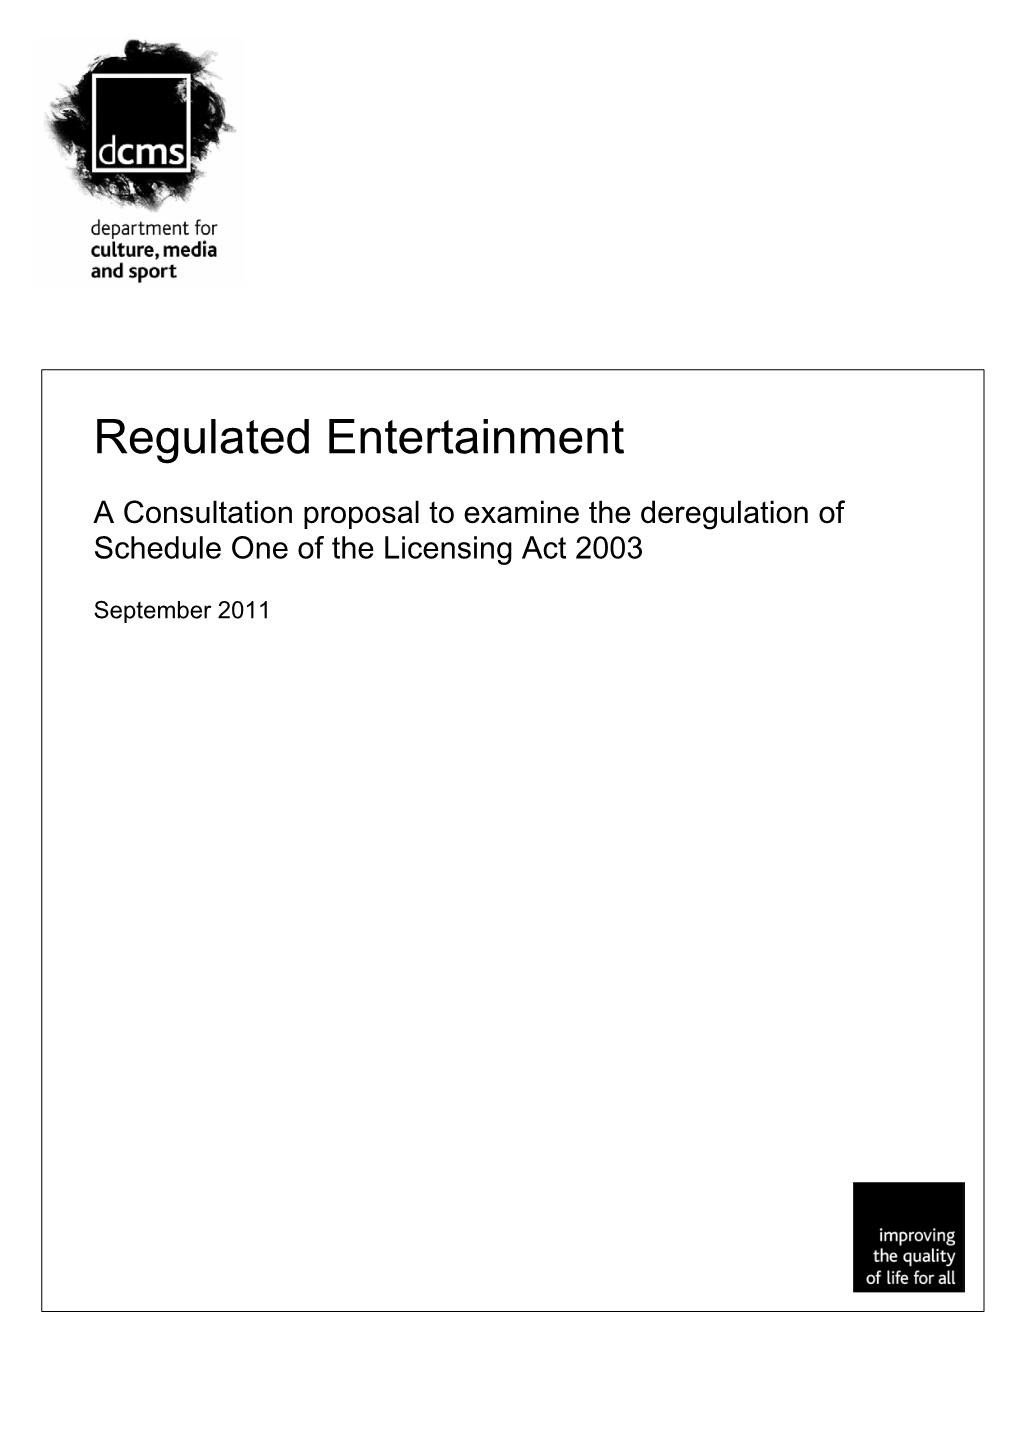 A Consultation Proposal to Examine the Deregulation of Schedule One of the Licensing Act 2003